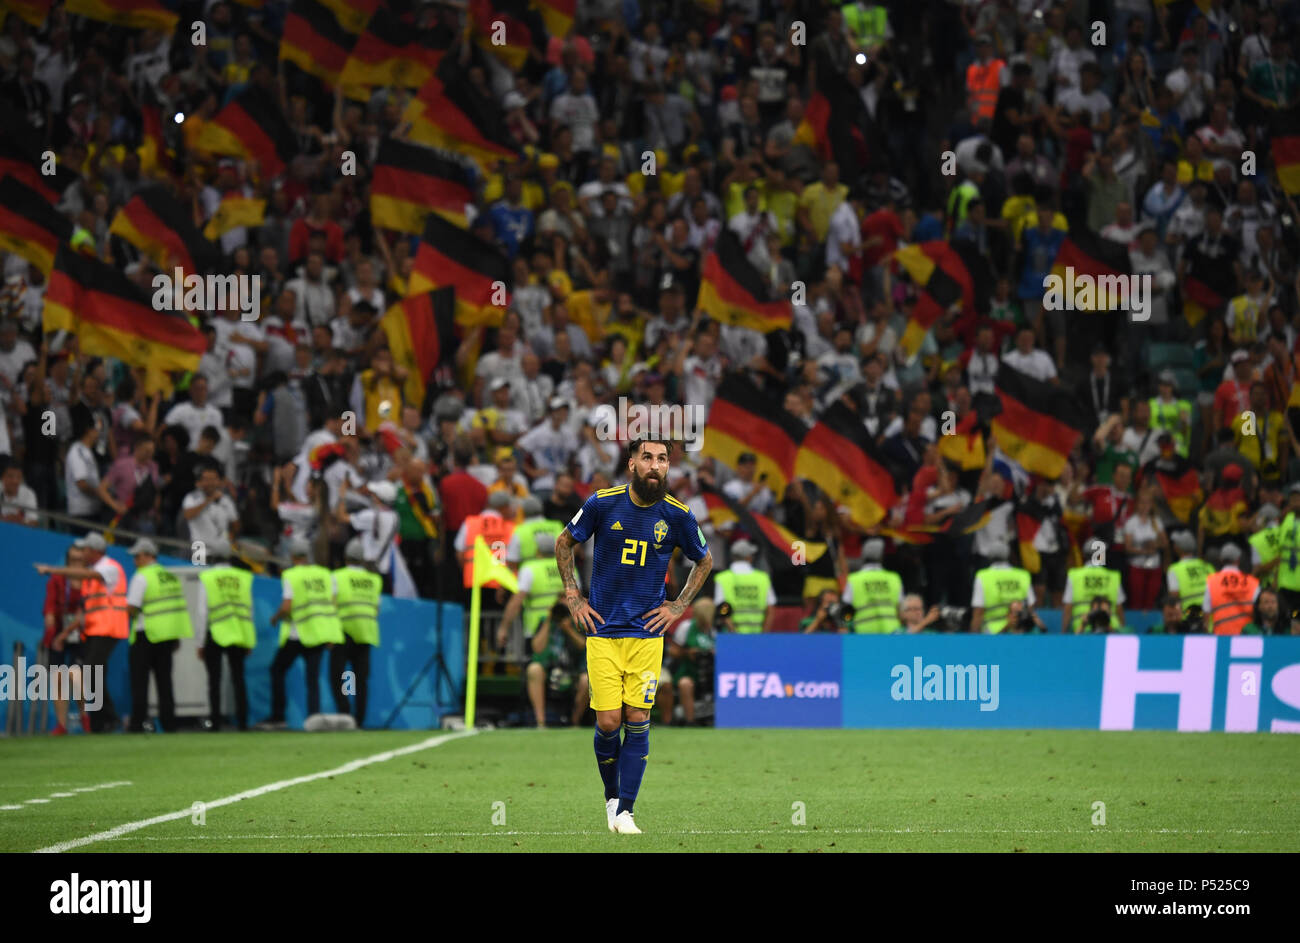 Sochi, Russia. 23rd June, 2018. World Cup, Germany vs Sweden, Group F, Matchday 2 of 3 at the Sochi Stadium: Jimmy Durmaz from Sweden. Photo: Ina Fassbender/dpa Credit: dpa picture alliance/Alamy Live News Credit: dpa picture alliance/Alamy Live News Stock Photo